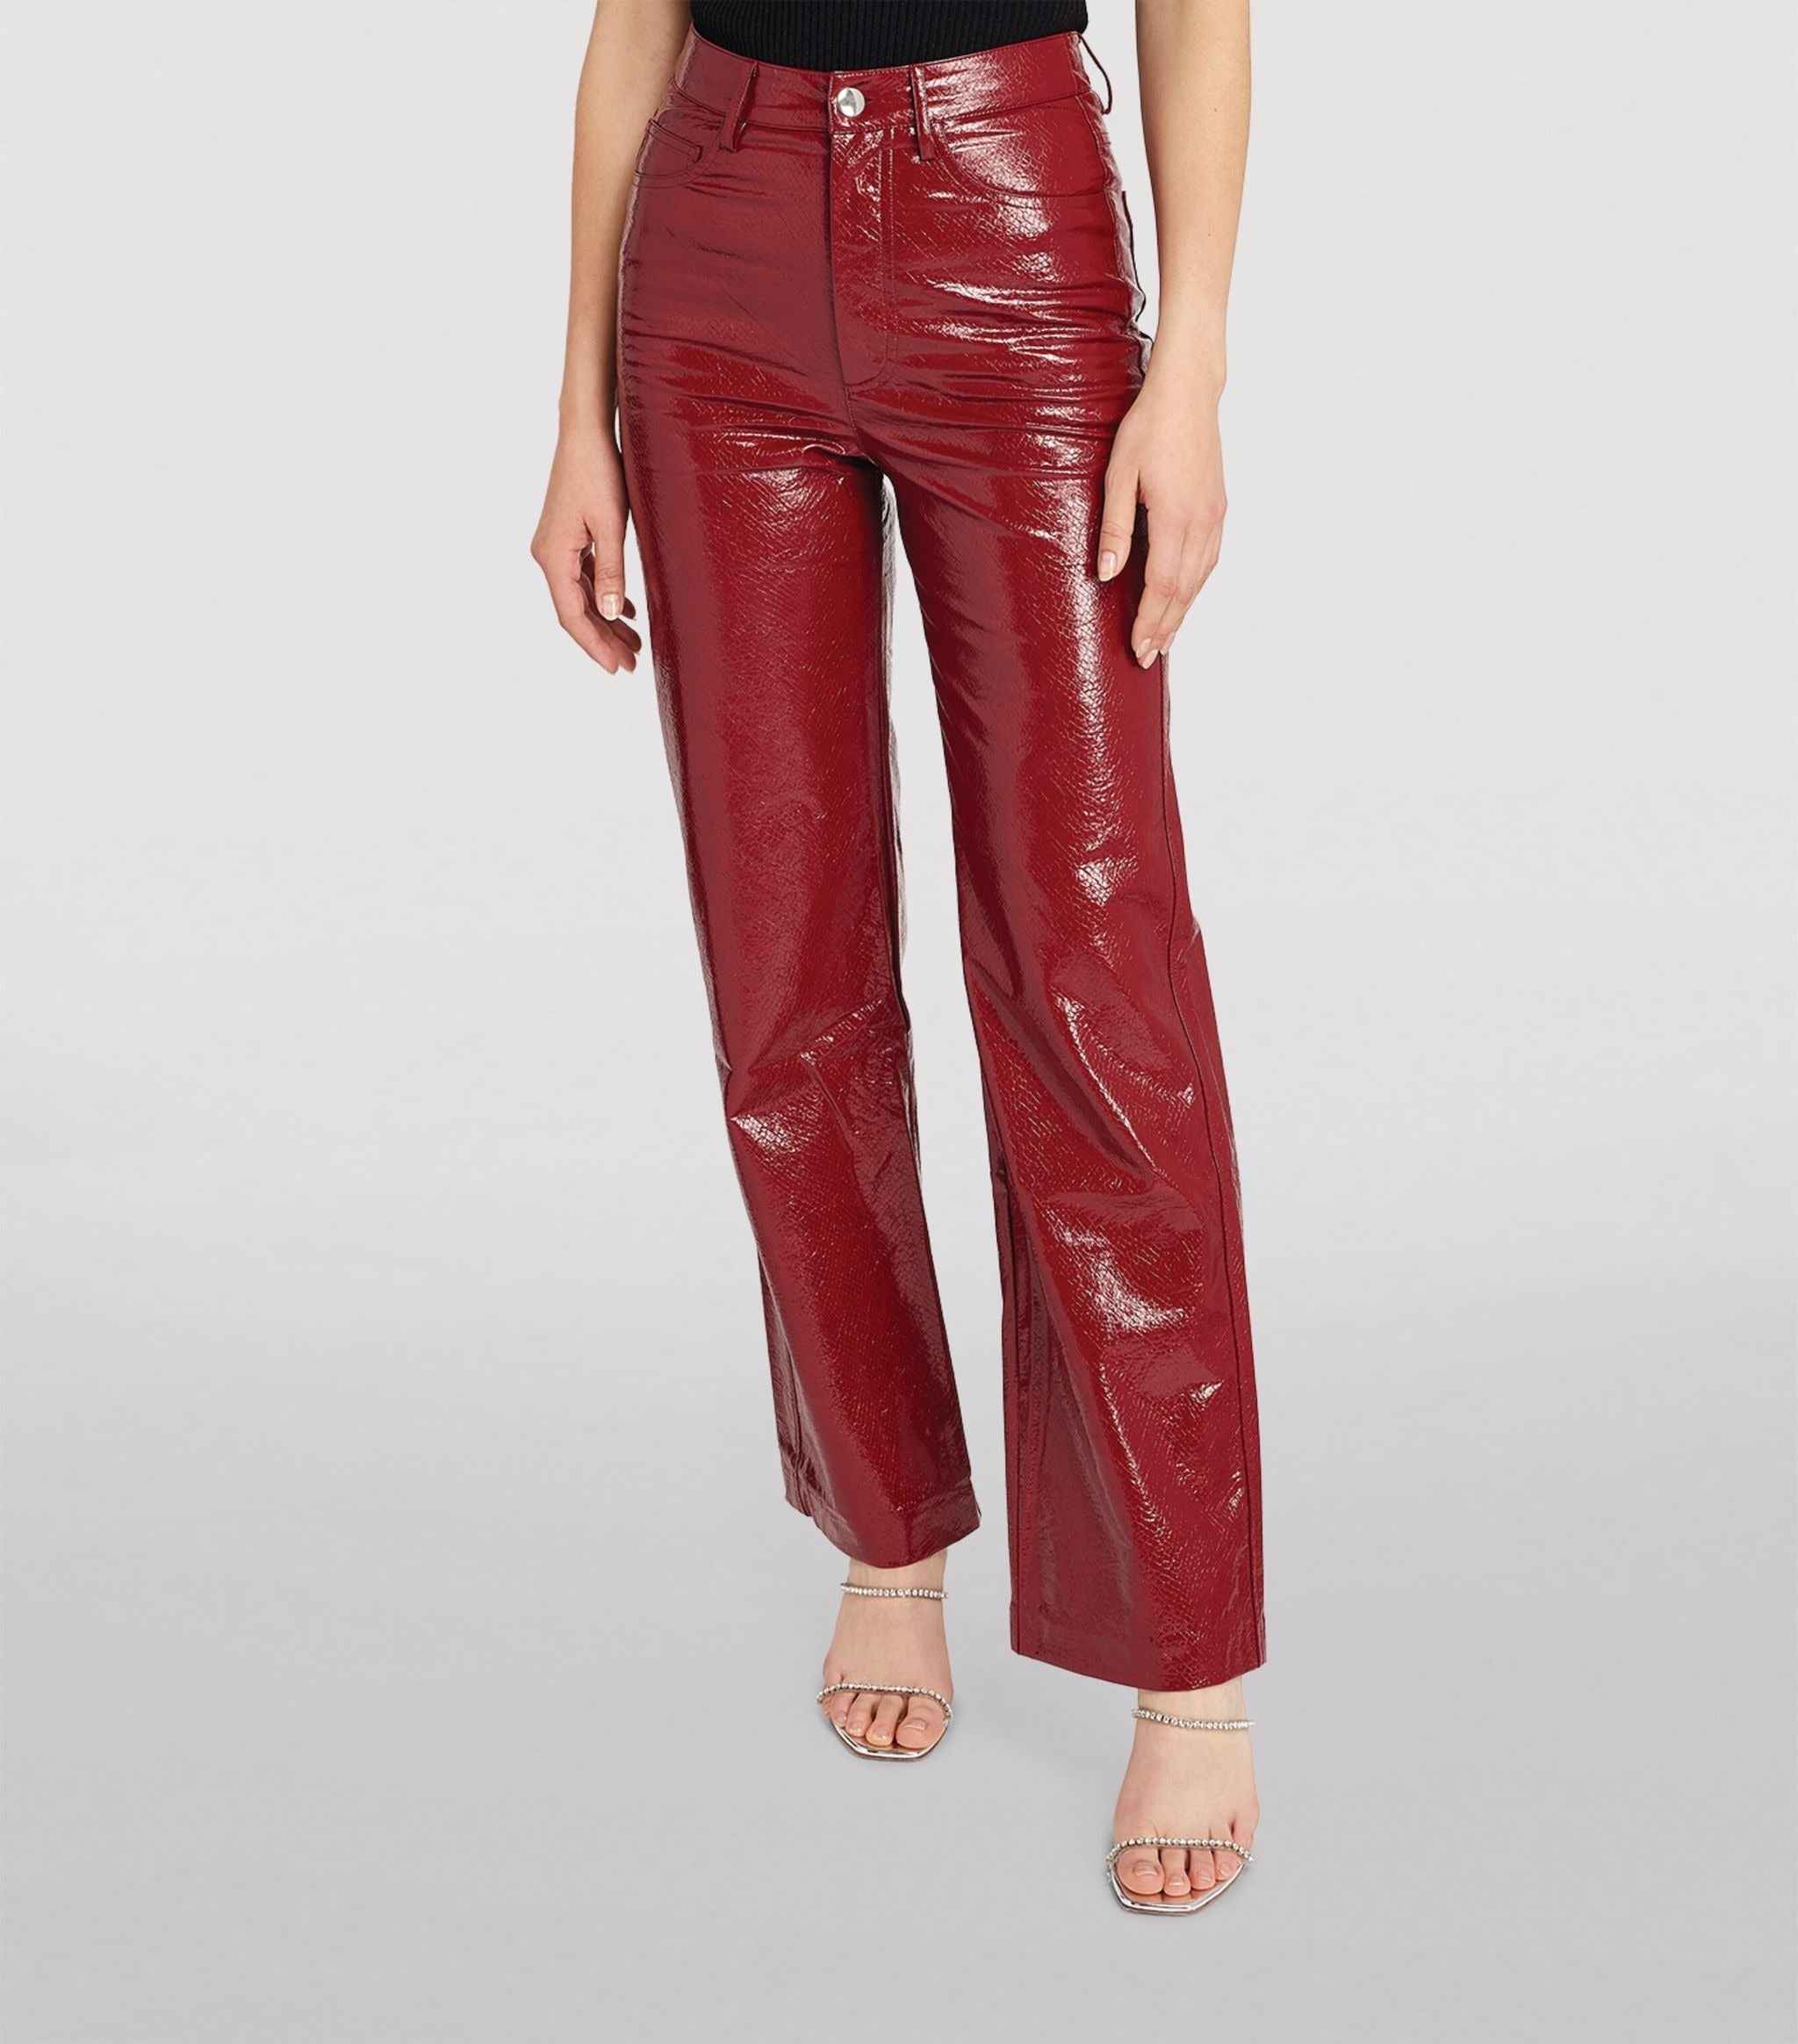 Rotate + Faux Leather Rotie Trousers